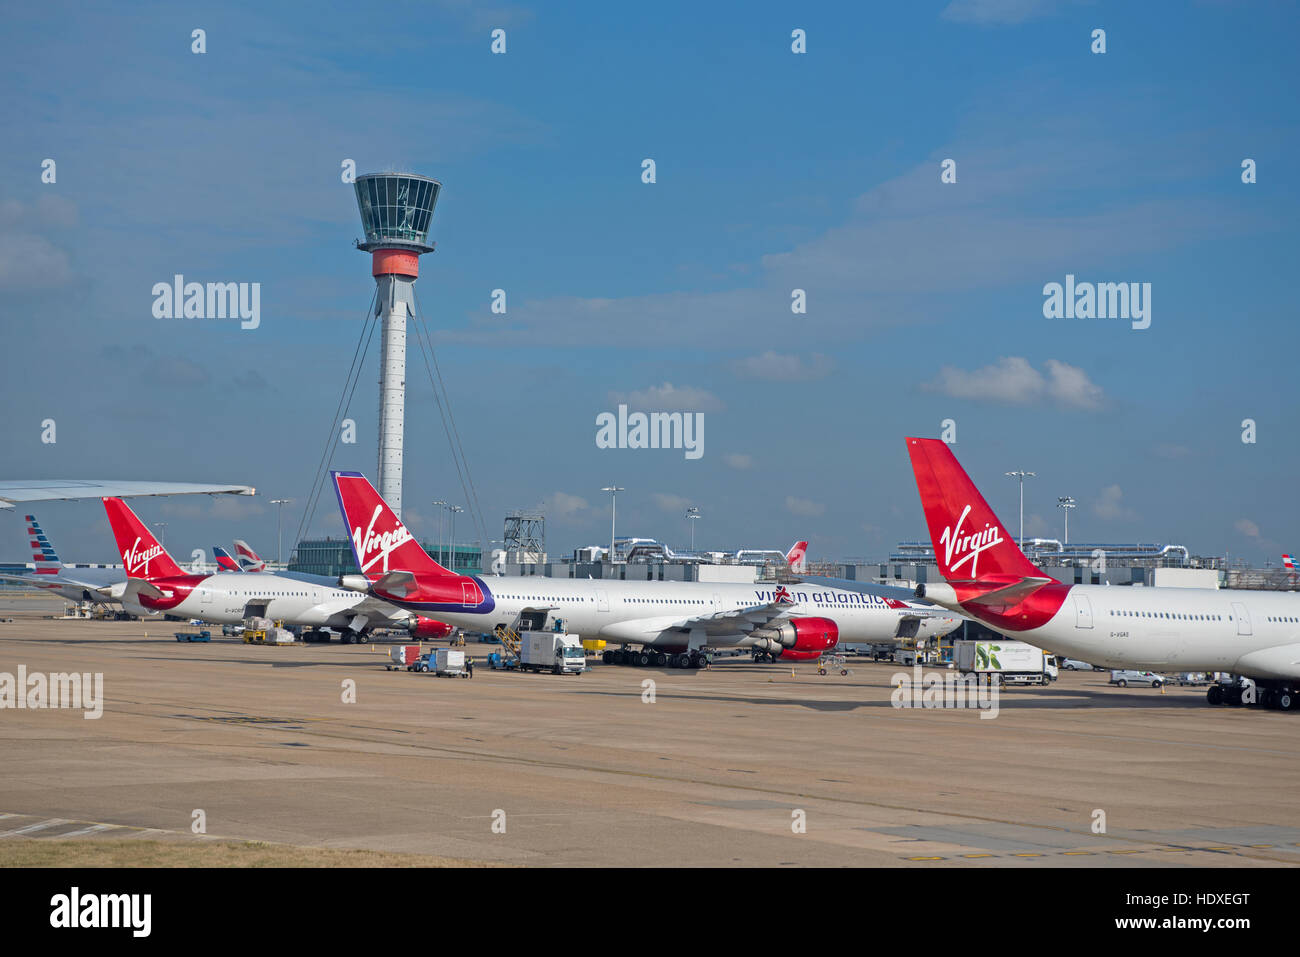 Virgin airliners parked beneath the control tower at London's Heathrow airport, UK.  SCO 11,272. Stock Photo